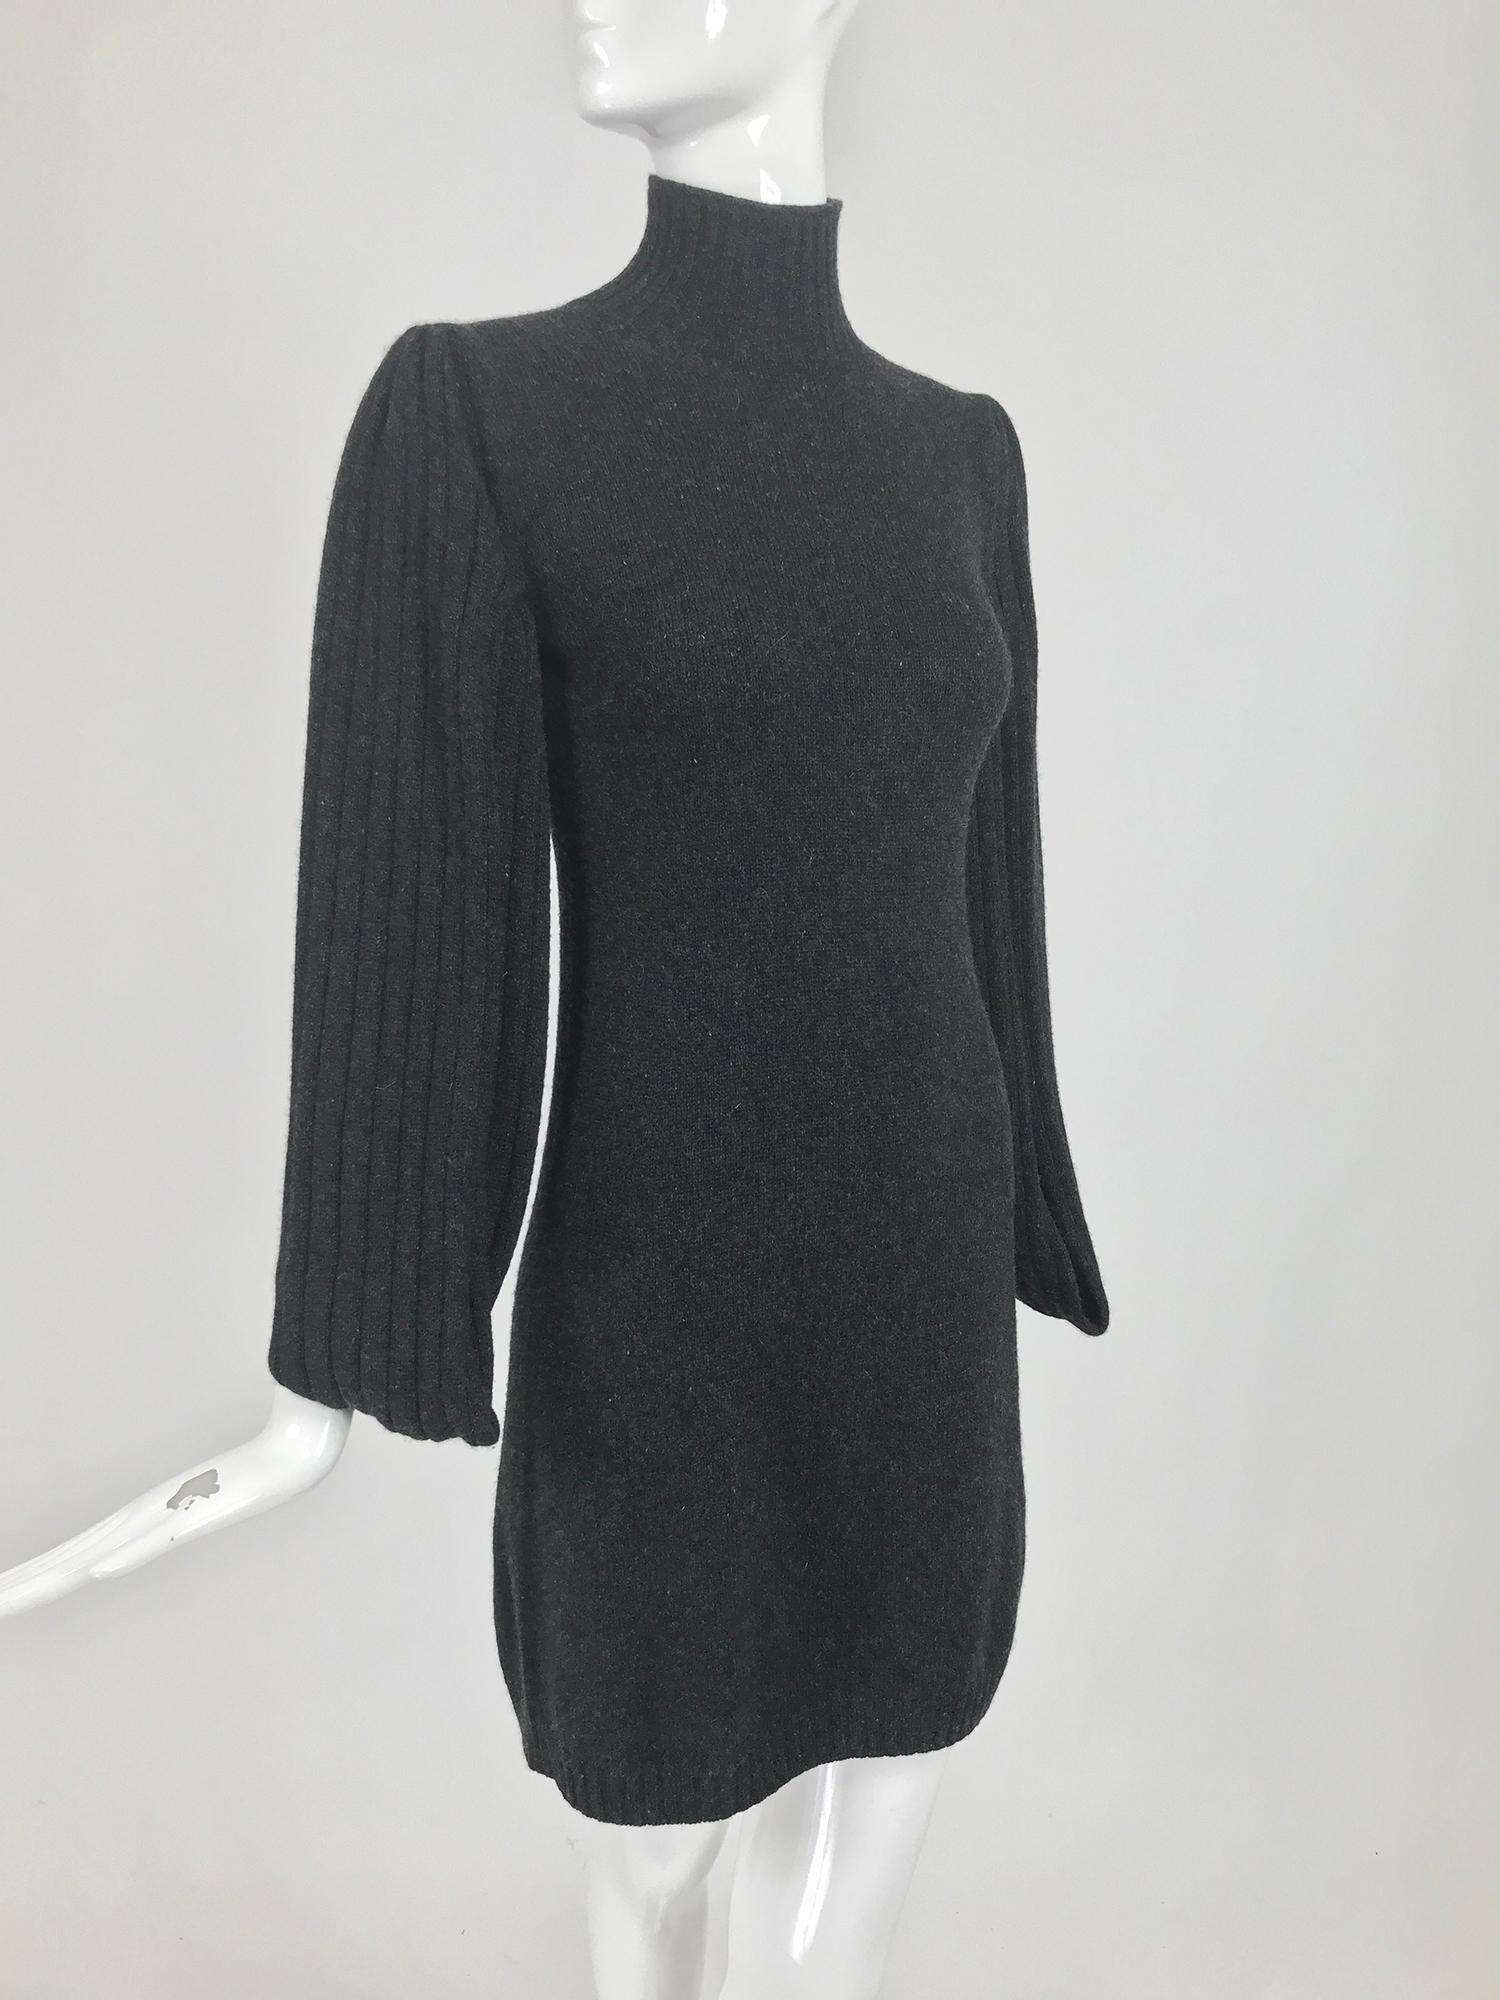 Chanel charcoal grey cashmere cage sleeve dress 2007a. This gorgeous dress is so soft, with the most unusual sleeves, they are open at the front and and back from cuff to under arm, they have v openings at the cuff for your hands. The sleeves are